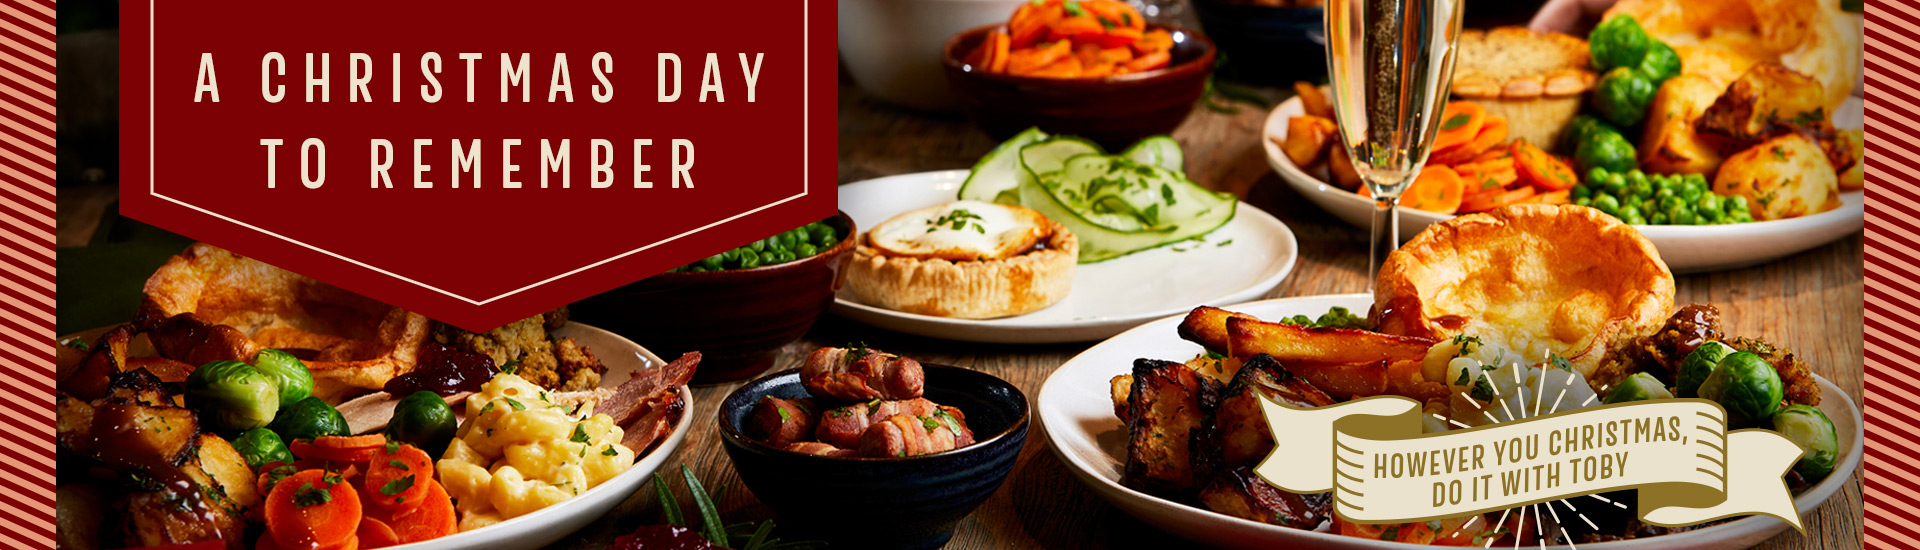 Christmas Day menu at Toby Carvery Maidstone